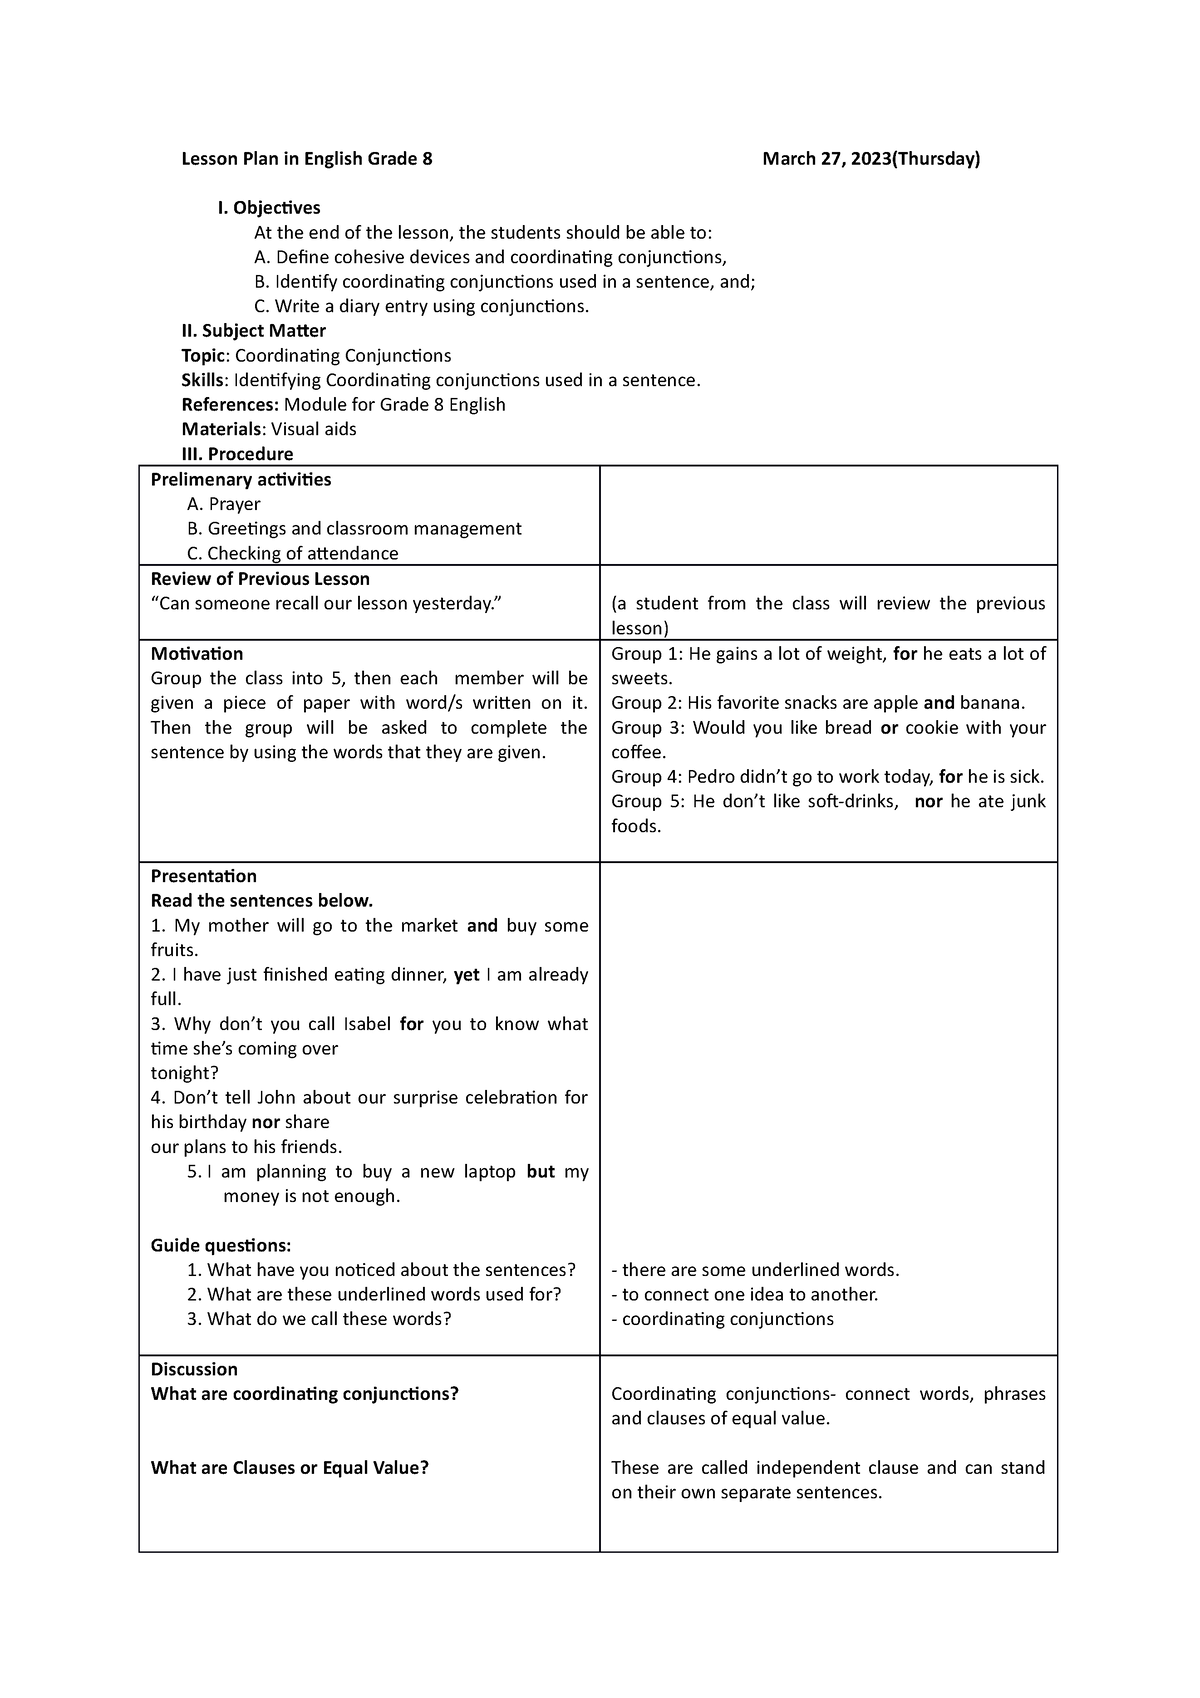 lesson-plan-march-23-2023-lesson-plan-in-english-grade-8-march-27